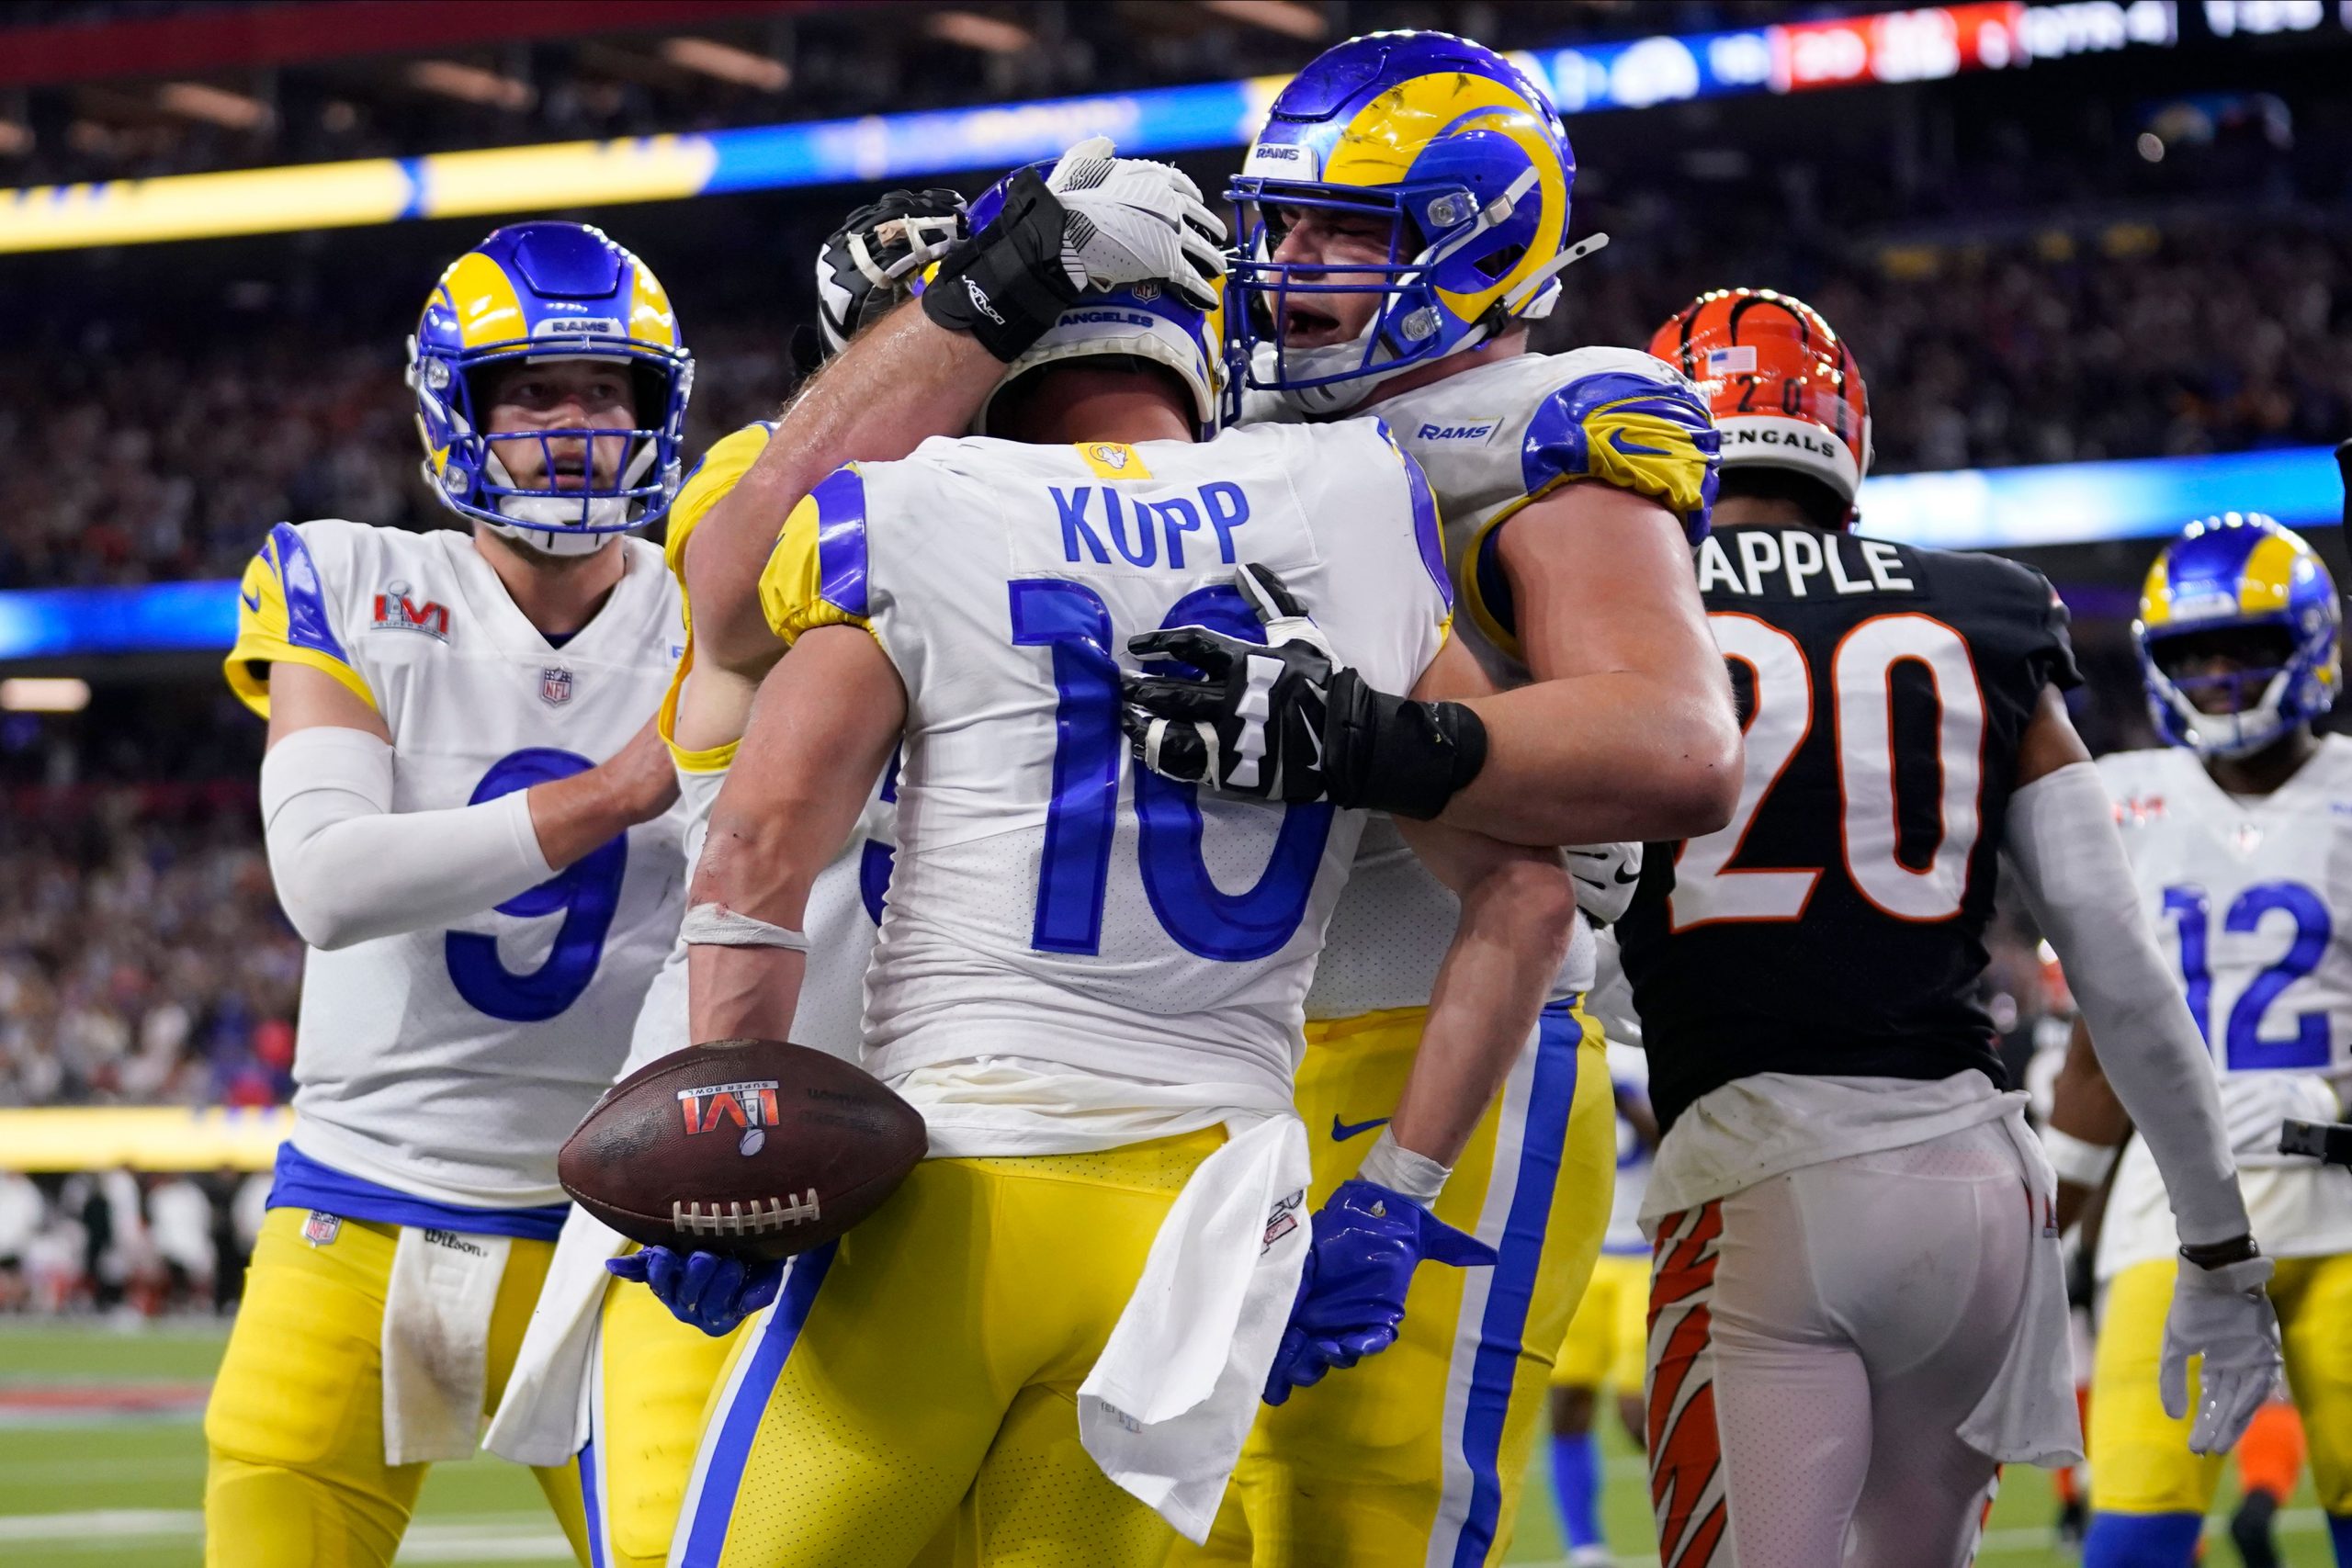 Super Bowl 2022: Fans react to Rams’ 23-20 win over Bengals in a thrilling final